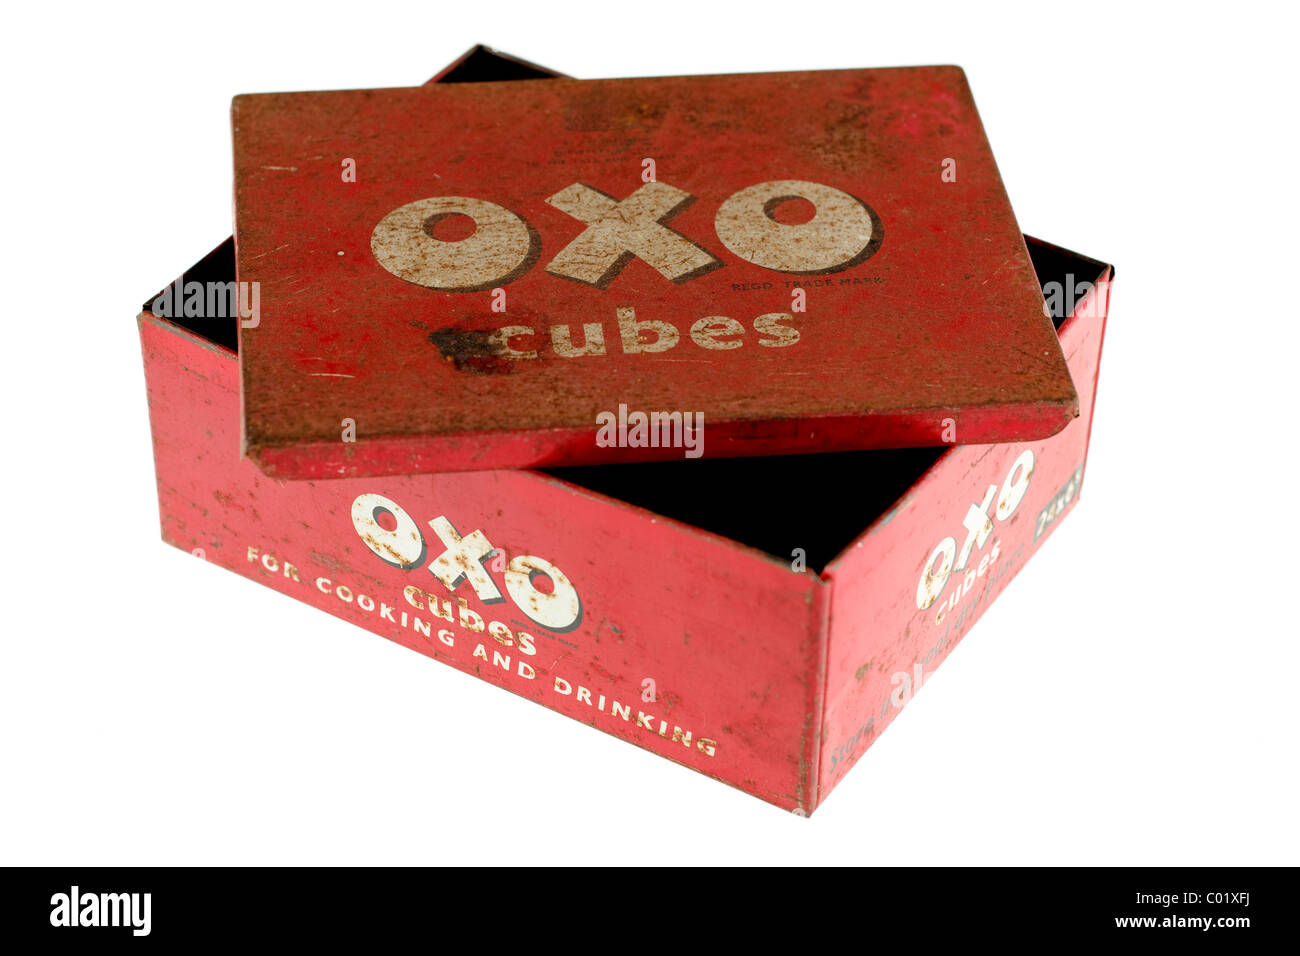 https://c8.alamy.com/comp/C01XFJ/old-vintage-red-rusting-oxo-cubes-tin-editorial-only-C01XFJ.jpg